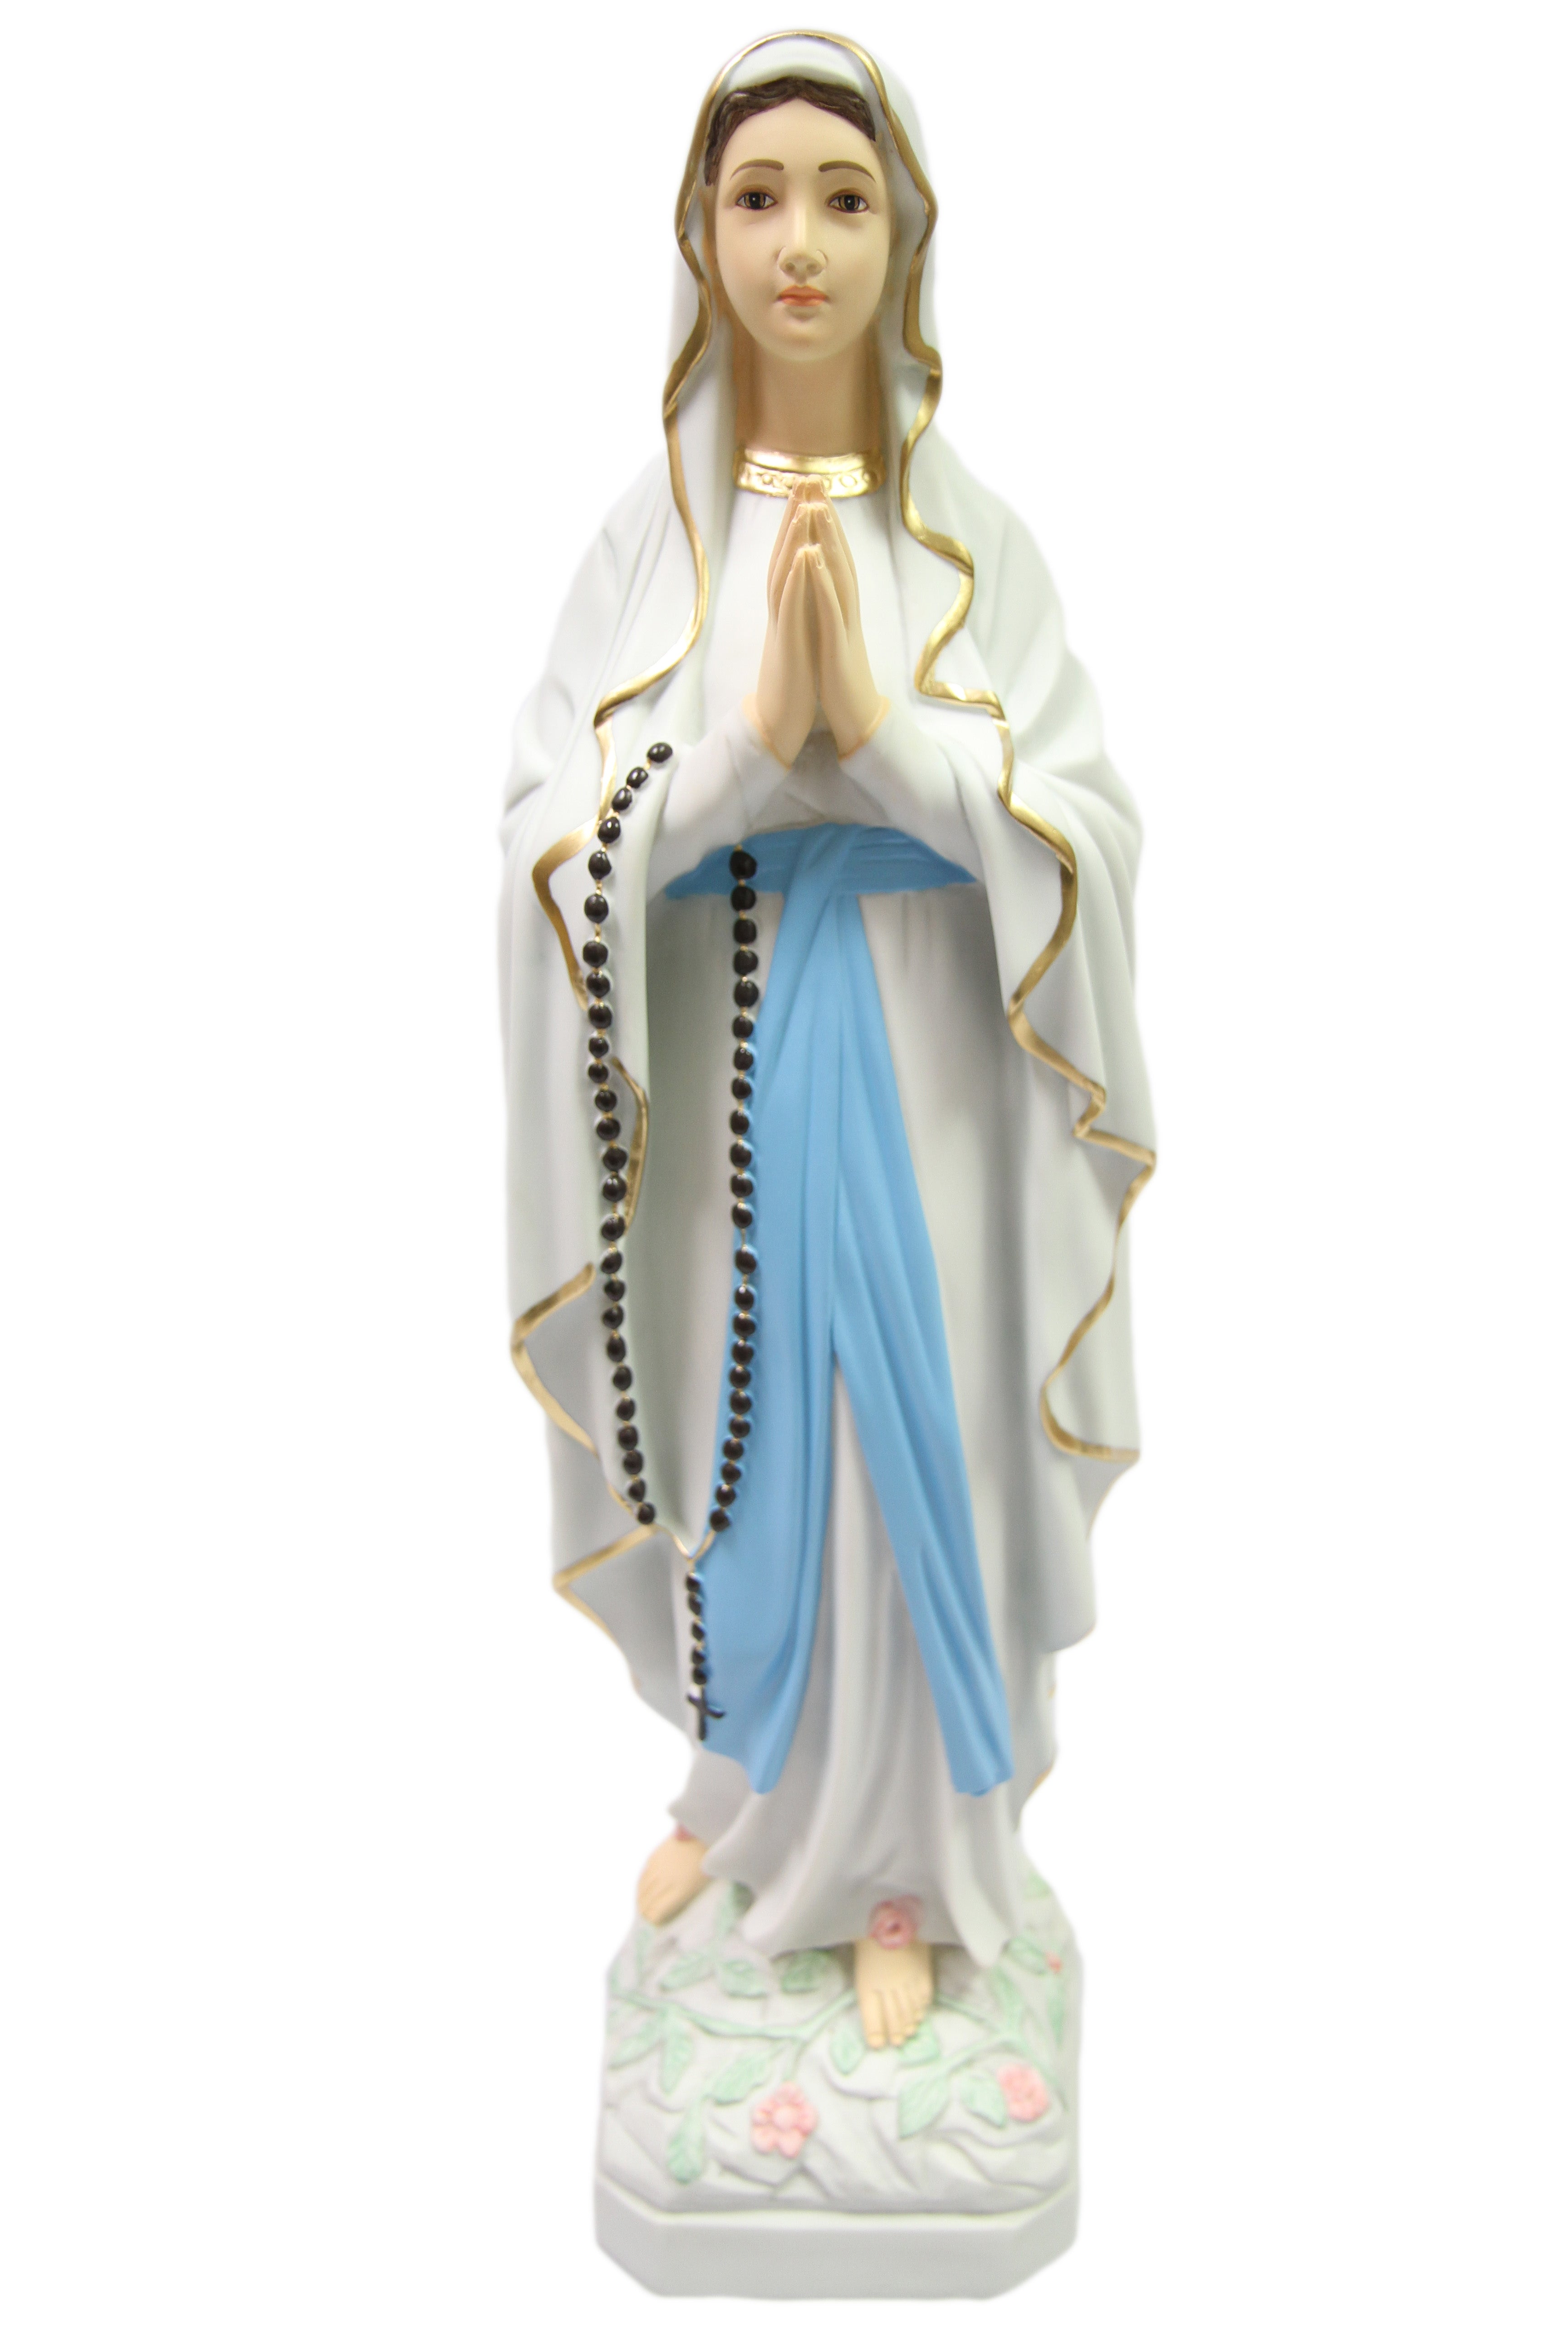 25 Inch Our Lady of Lourdes Virgin Mary Blessed Mother Catholic Statue Religious Vittoria Collection Made in Italy